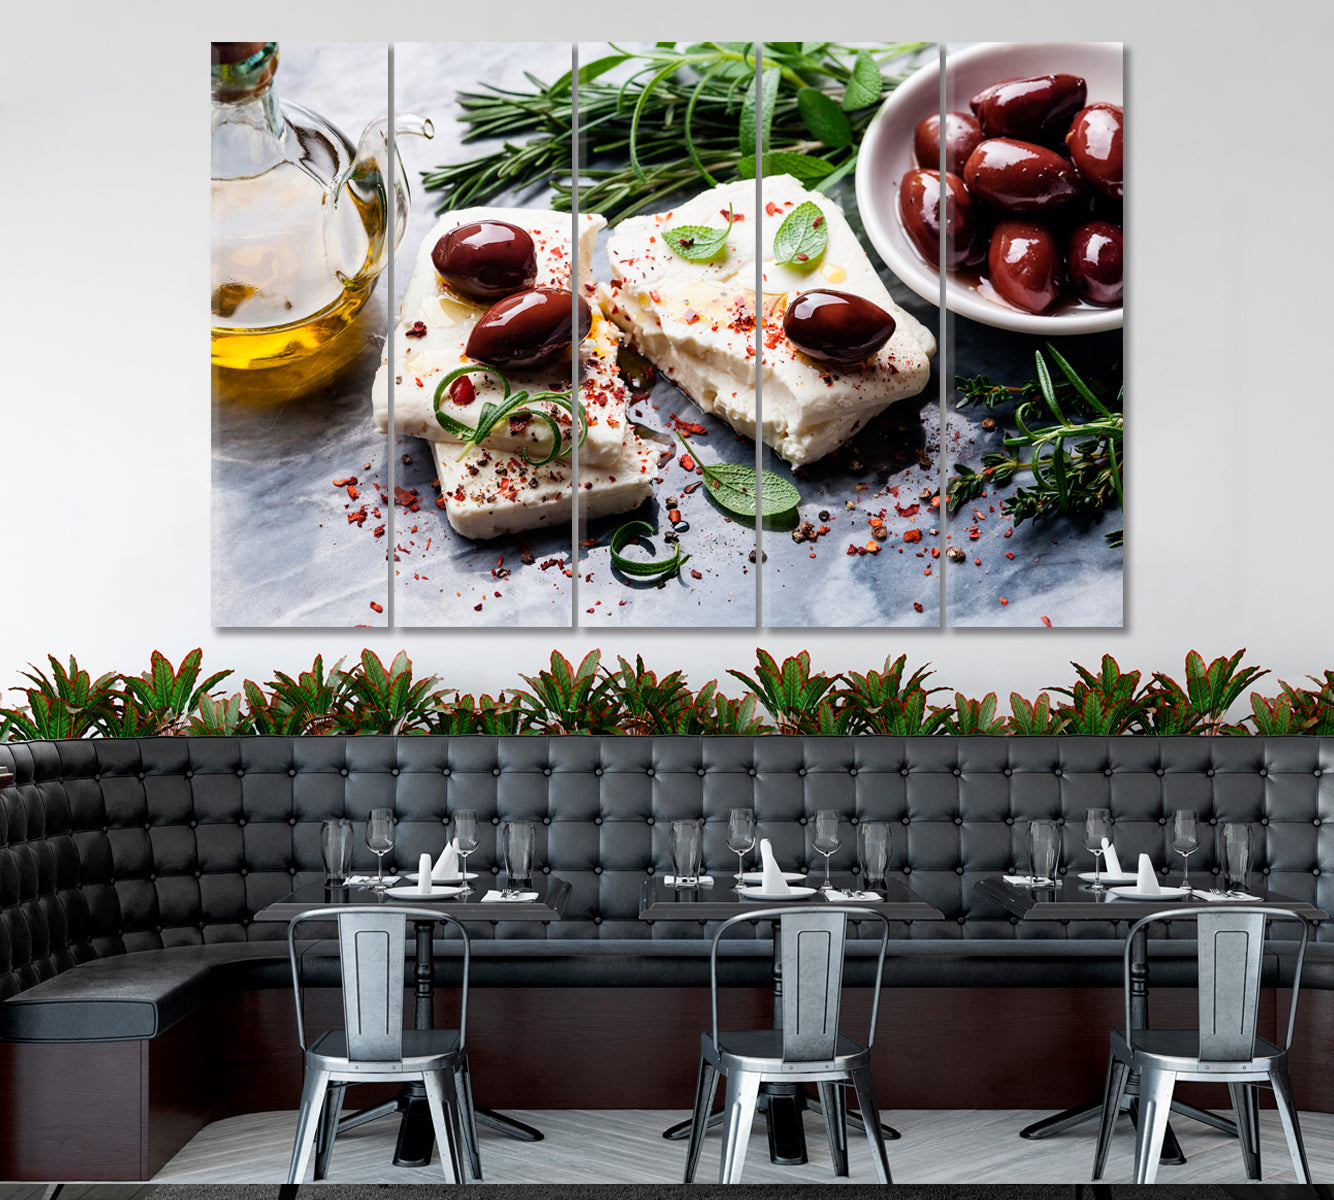 Feta Cheese with Olives Canvas Print ArtLexy 5 Panels 36"x24" inches 